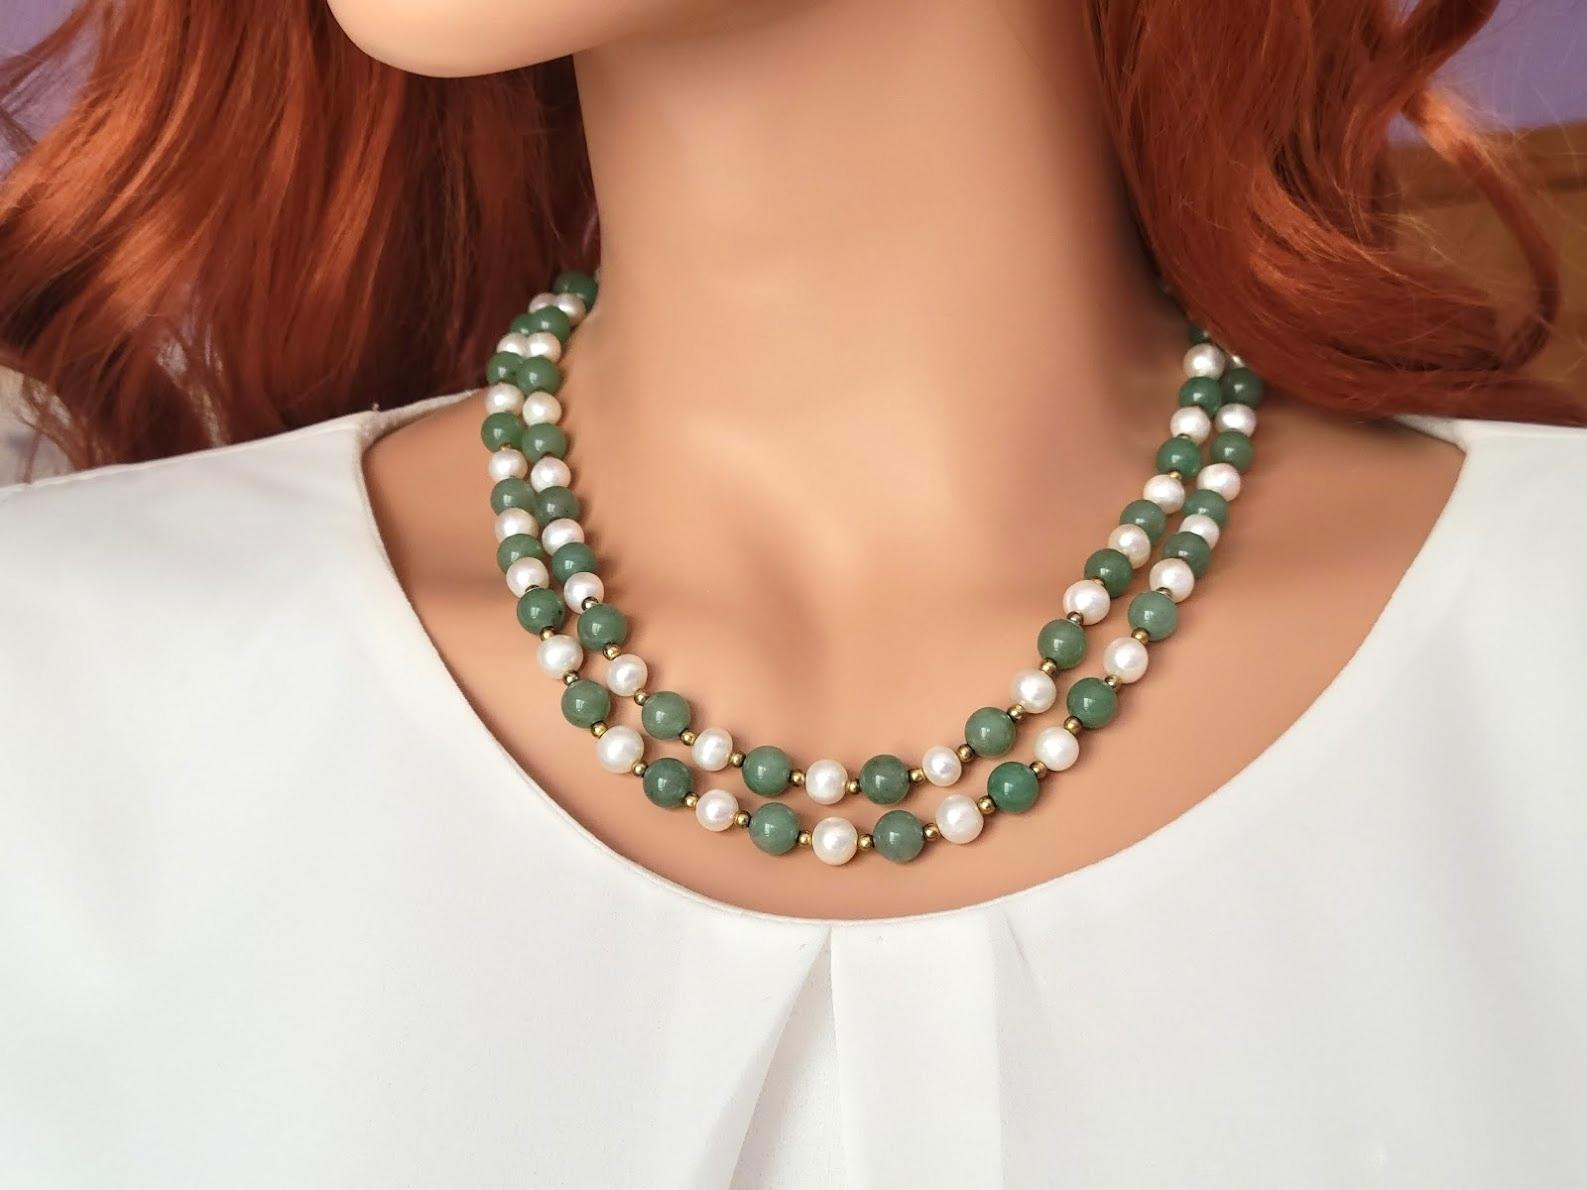 This beautiful, elegant, classic, long necklace is made of natural freshwater pearls and natural green jade. The jade beads are pure, uniform, soft green, mint color, and delicate shiny, and they're sumptuous in how they look and feel.
The vintage